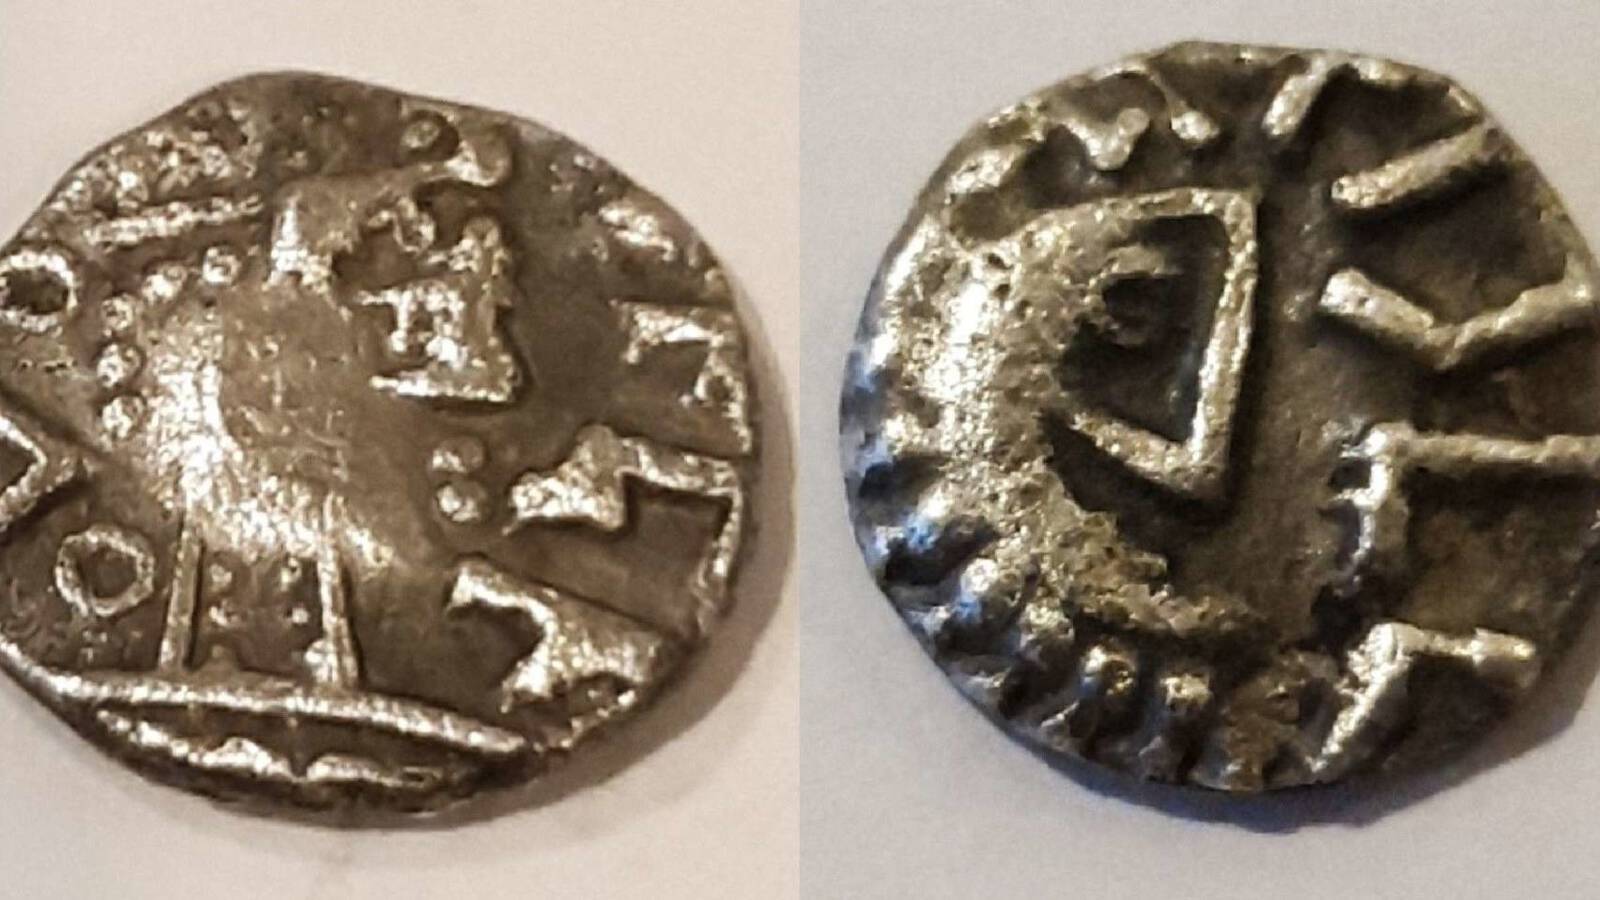 The newly discovered sceatta coin, photo by William Posthouwer